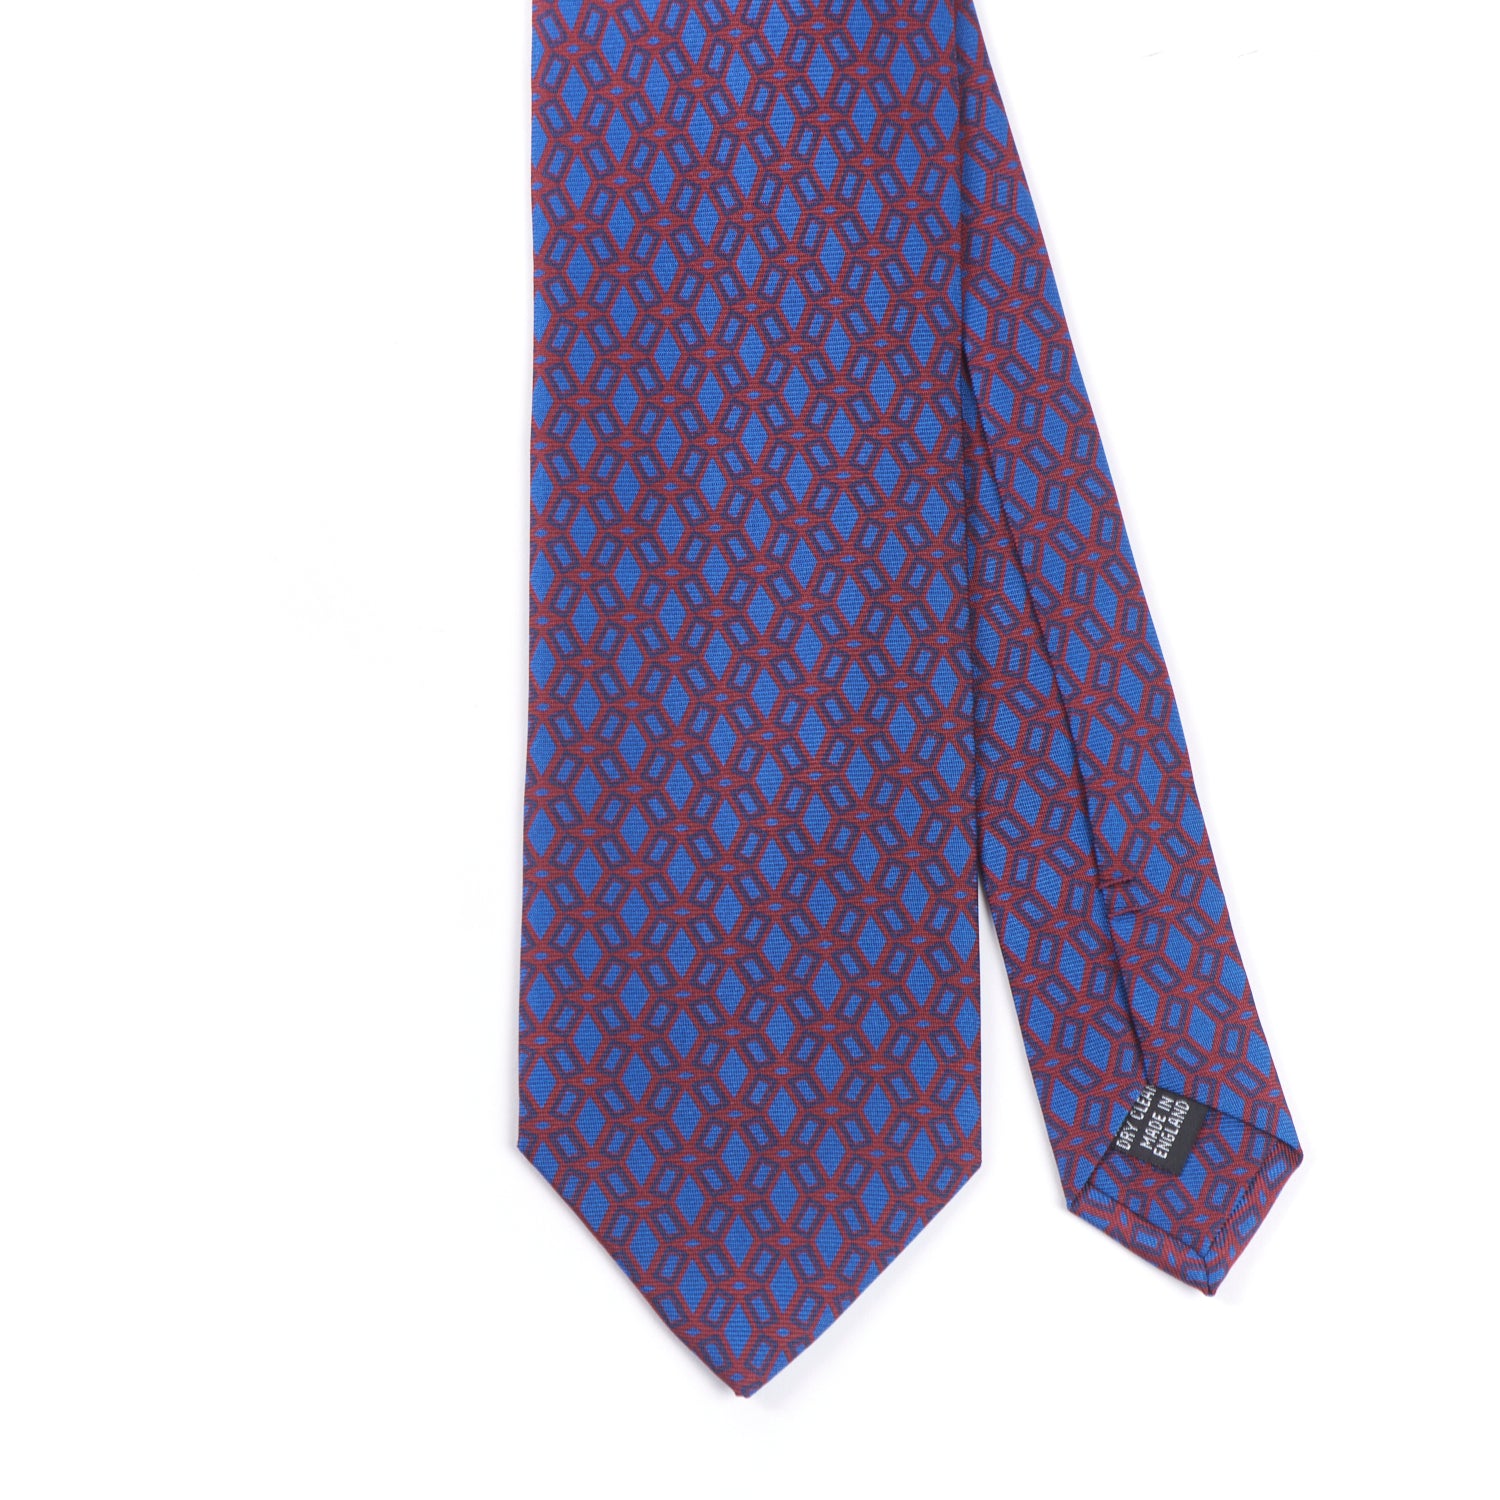 A Sovereign Grade Rust Ancient Madder Tie, 150cm by KirbyAllison.com with a geometric pattern.